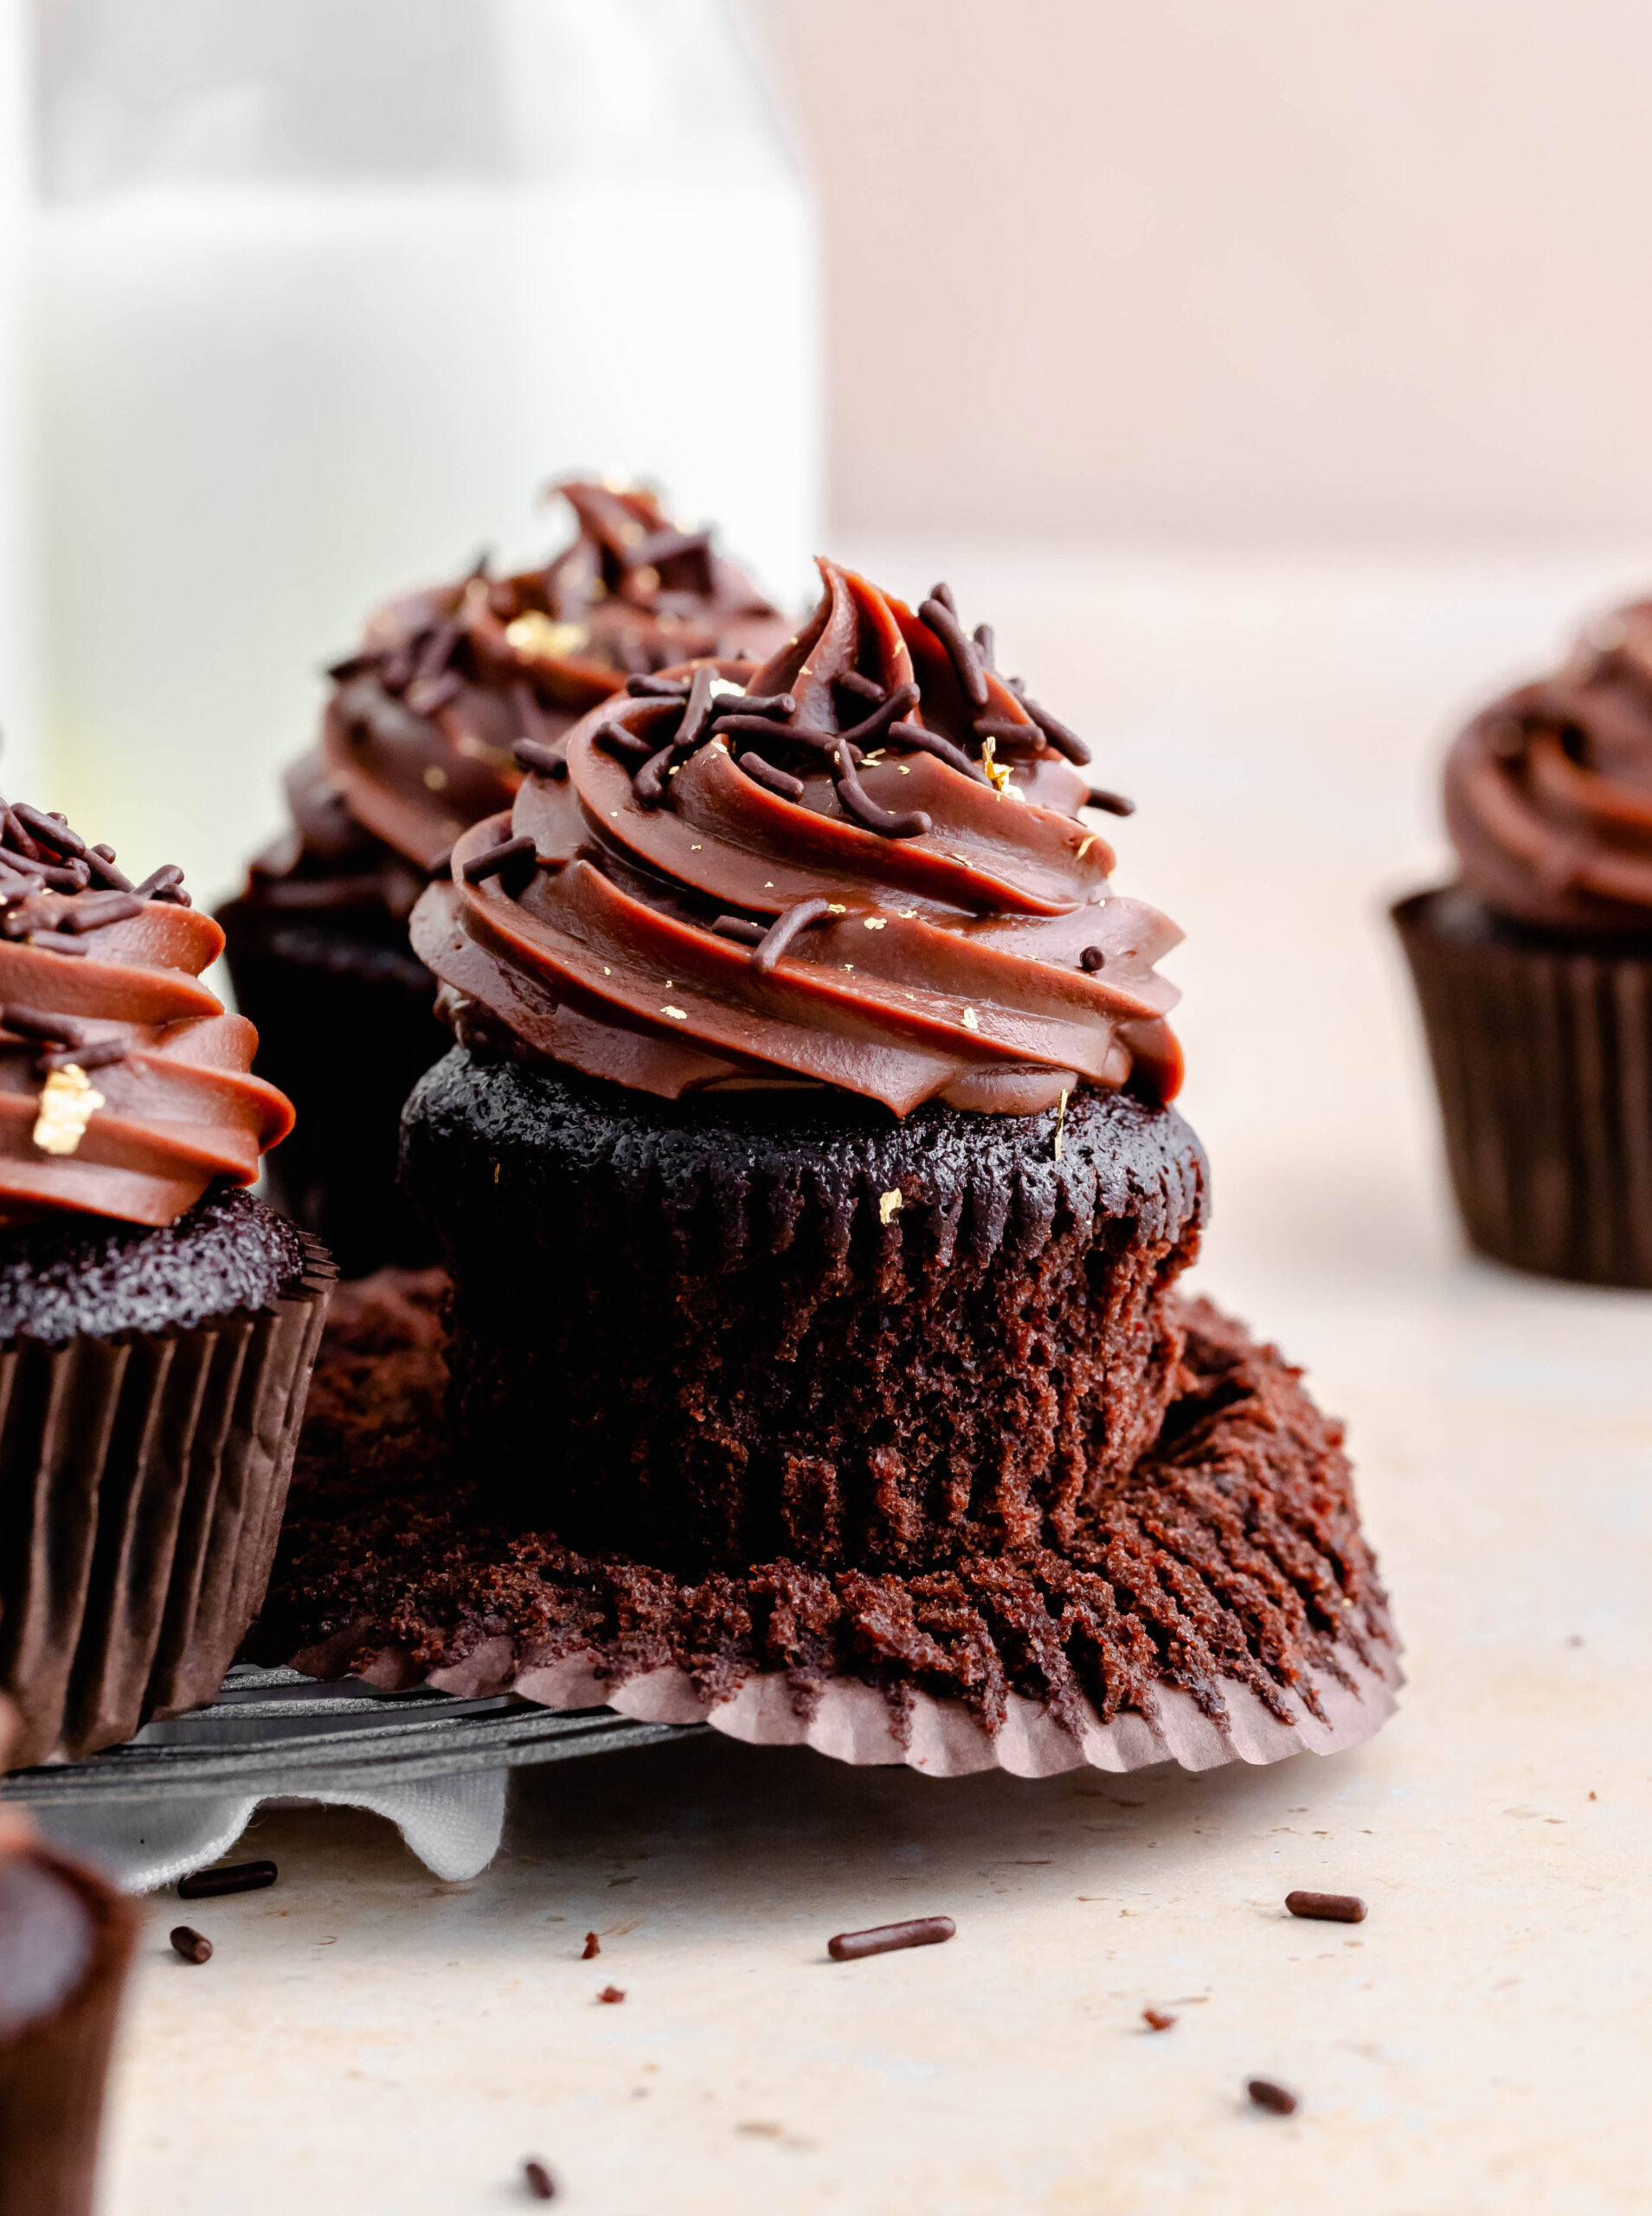 Chocolate cupcake with chocolate fudge frosting.